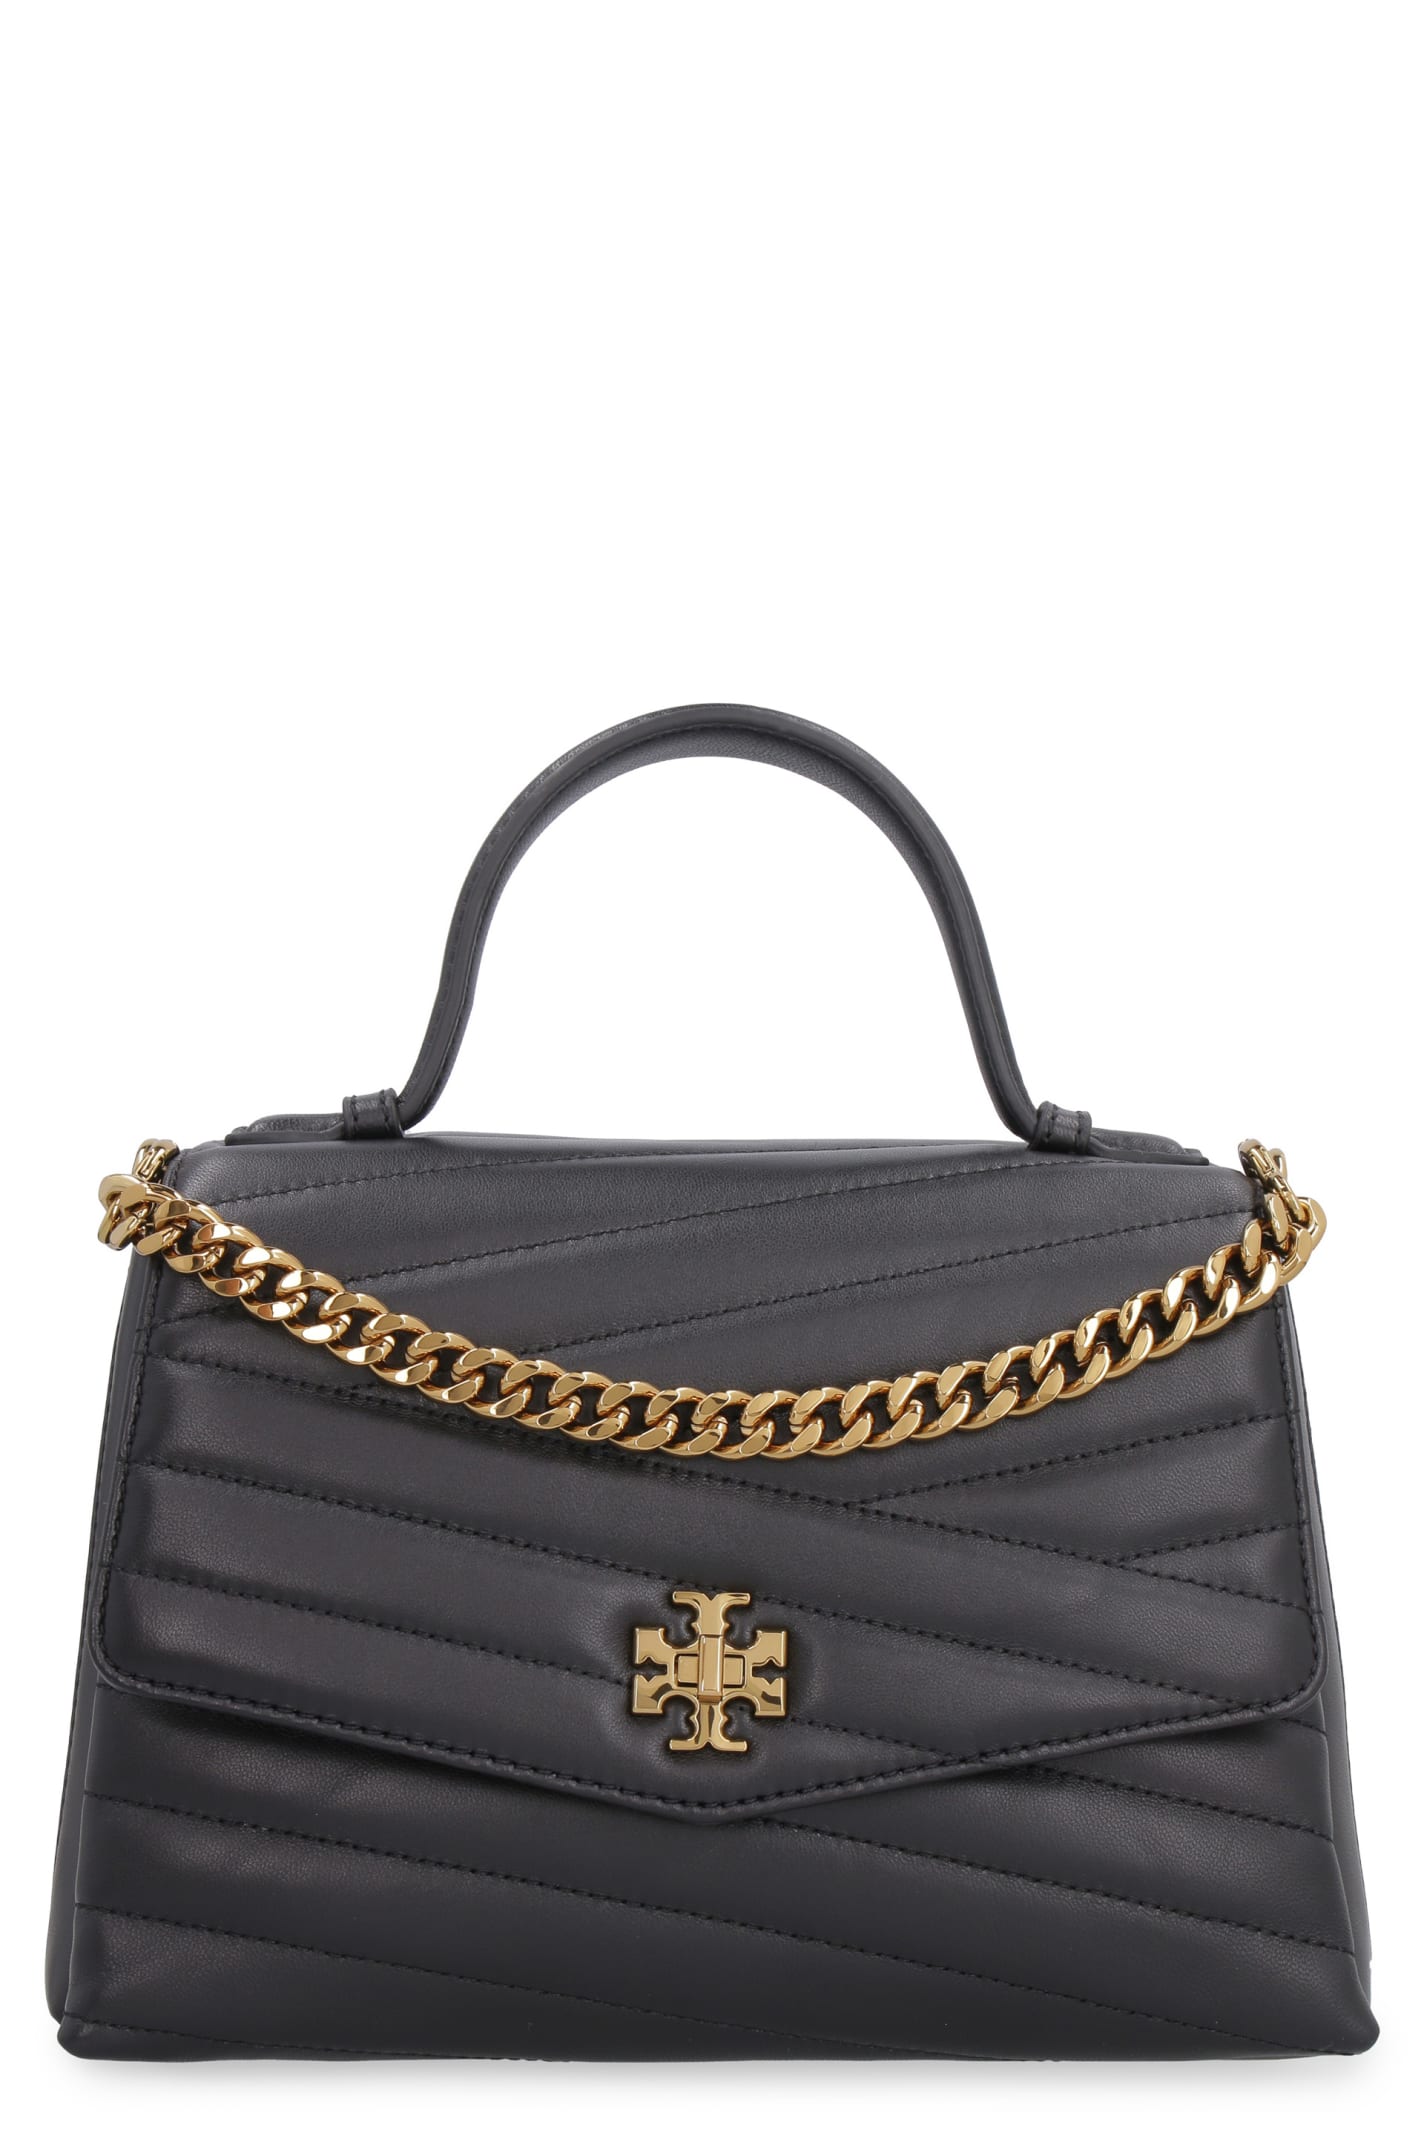 TORY BURCH KIRA QUILTED LEATHER HANDBAG,11182506